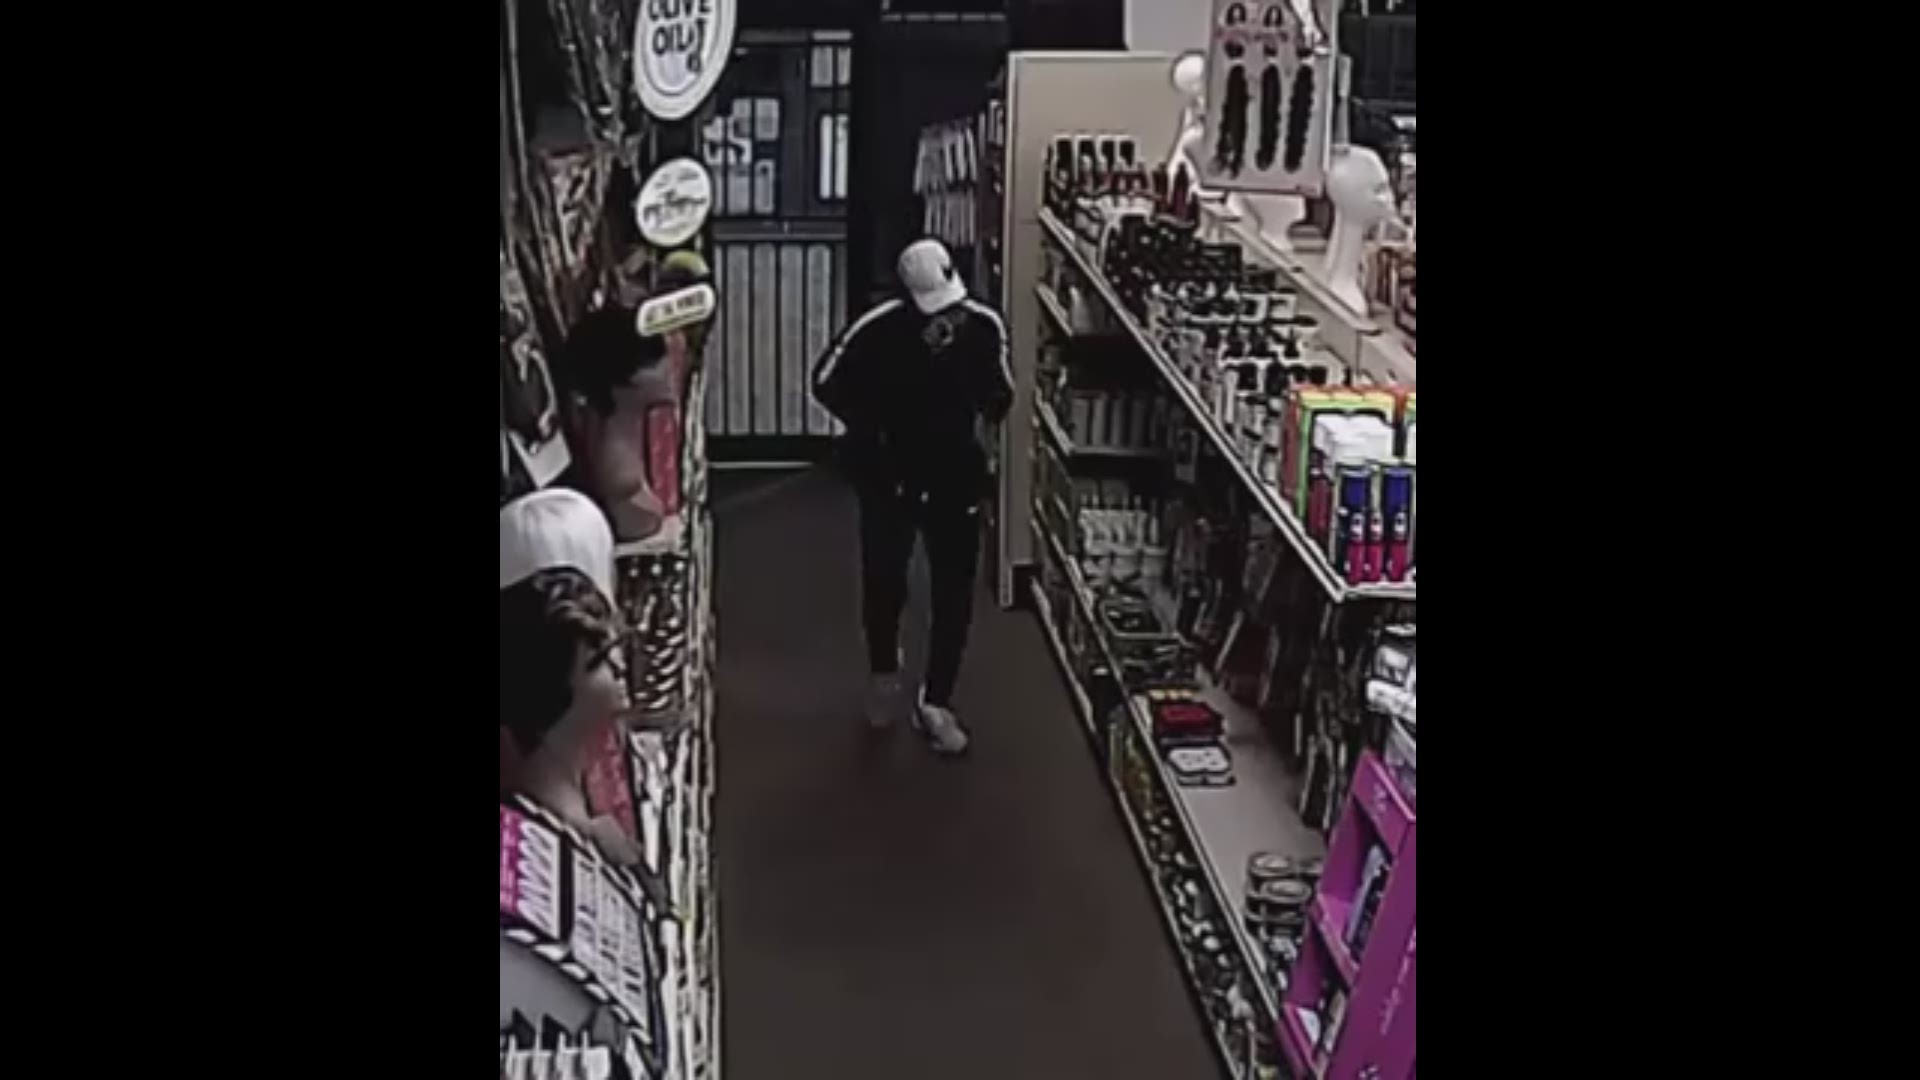 Houston police are looking for two thieves who walked into a beauty supply on Houston’s northside with guns drawn.